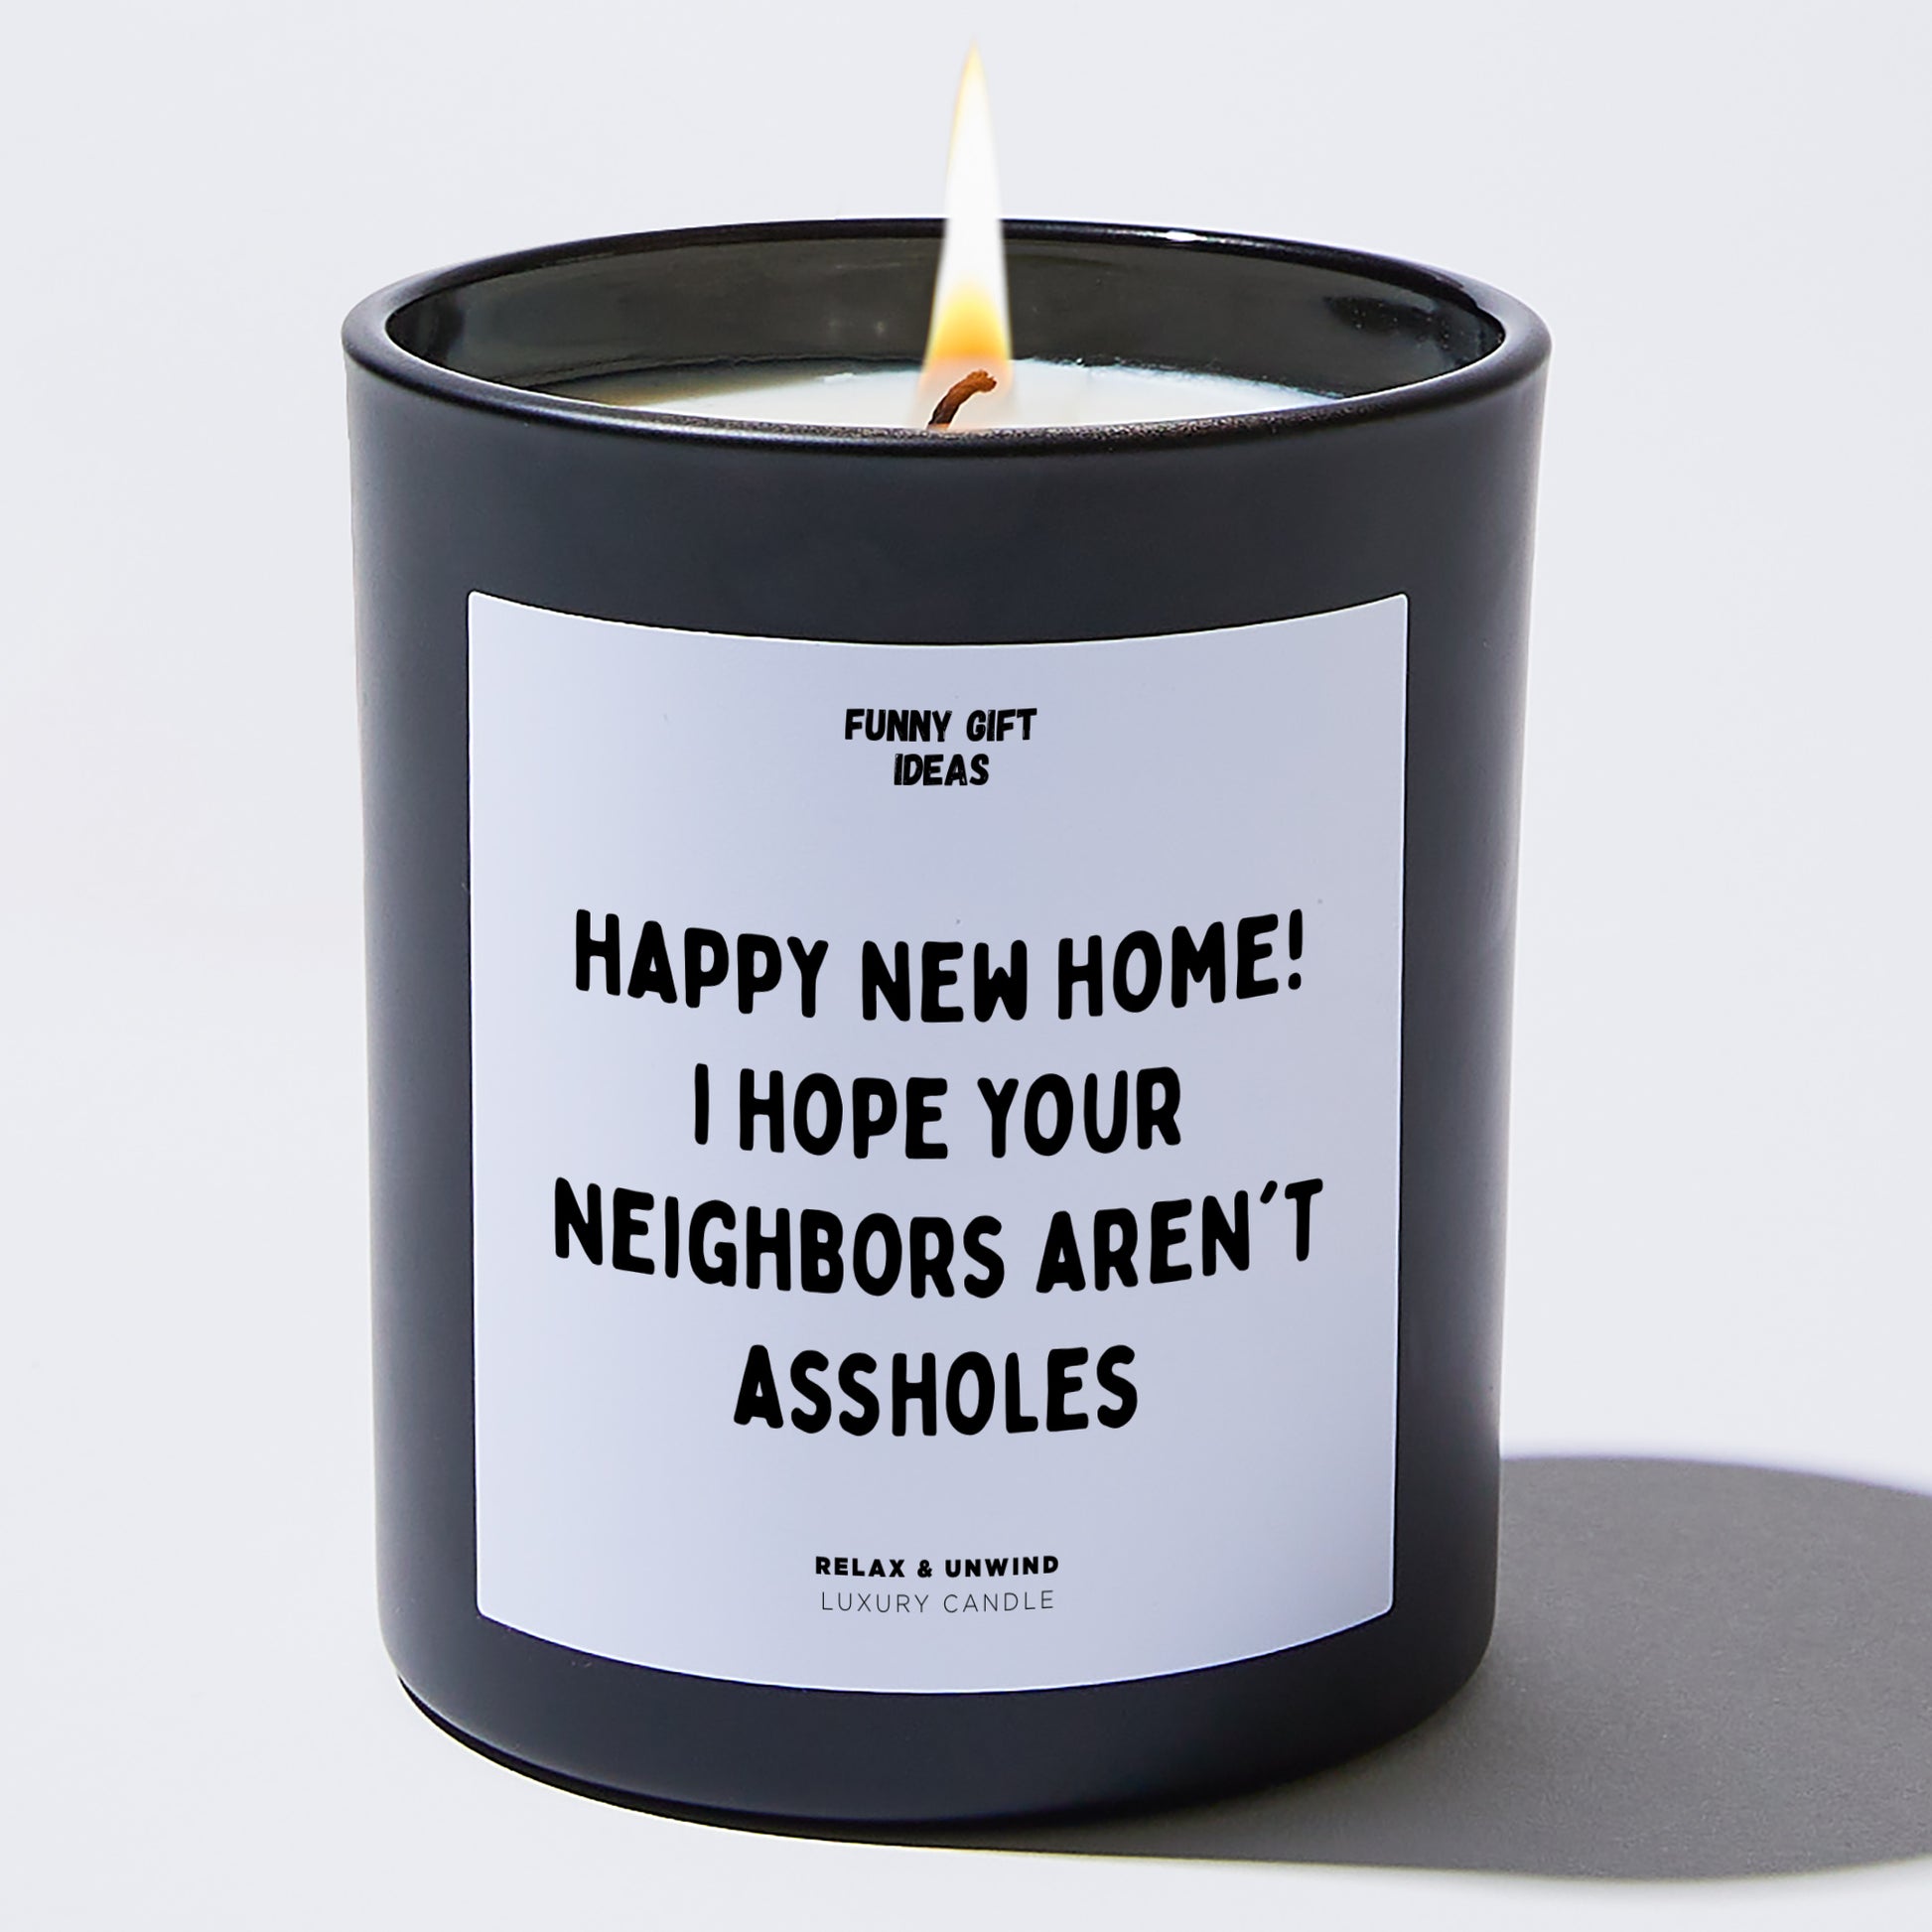 Unique Housewarming Gift Happy New Home! I Hope Your Neighbors Aren't Assholes - Funny Gift Ideas